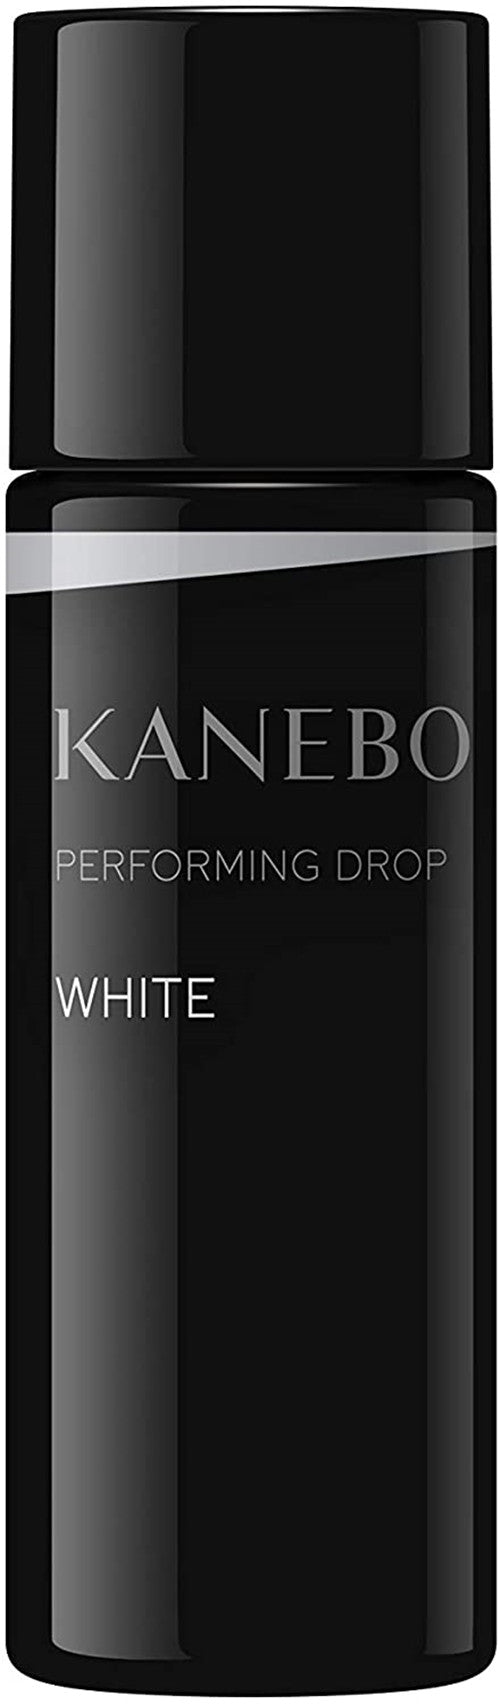 Kanebo Performing Drop Misty Makeup Base White 25ml spf25 · Pa ++ Japan With Love